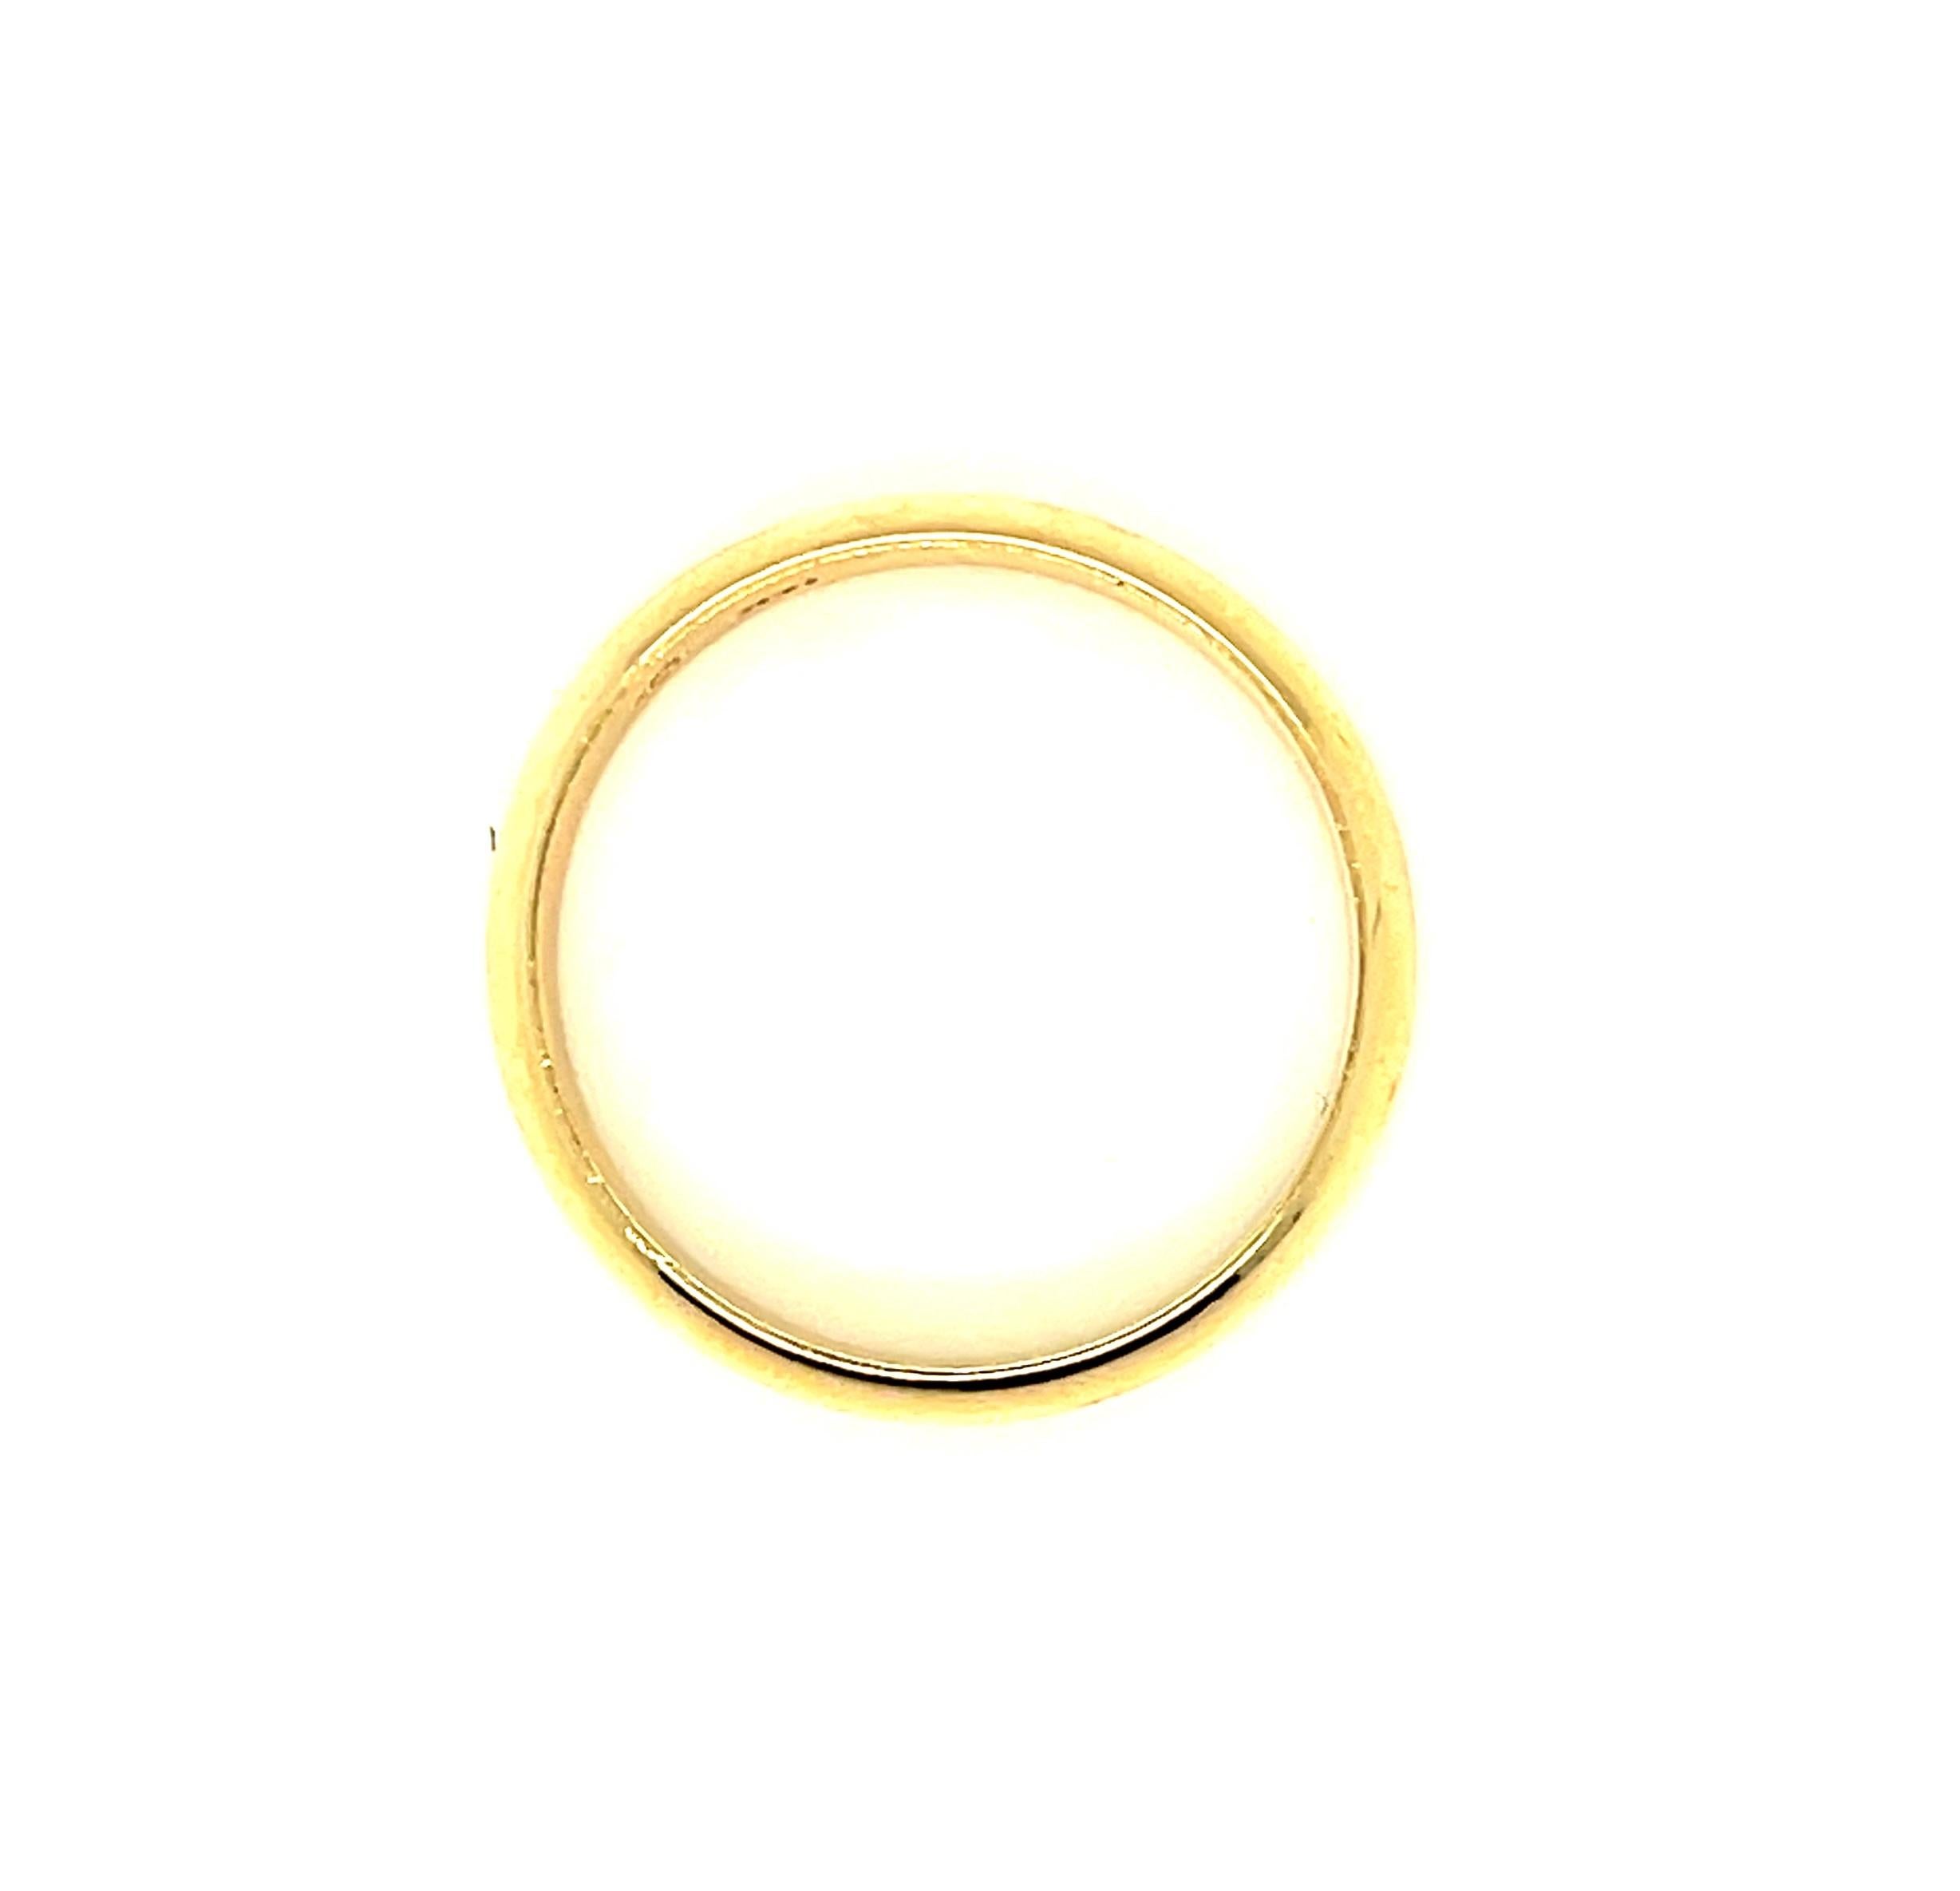 average weight of gold ring